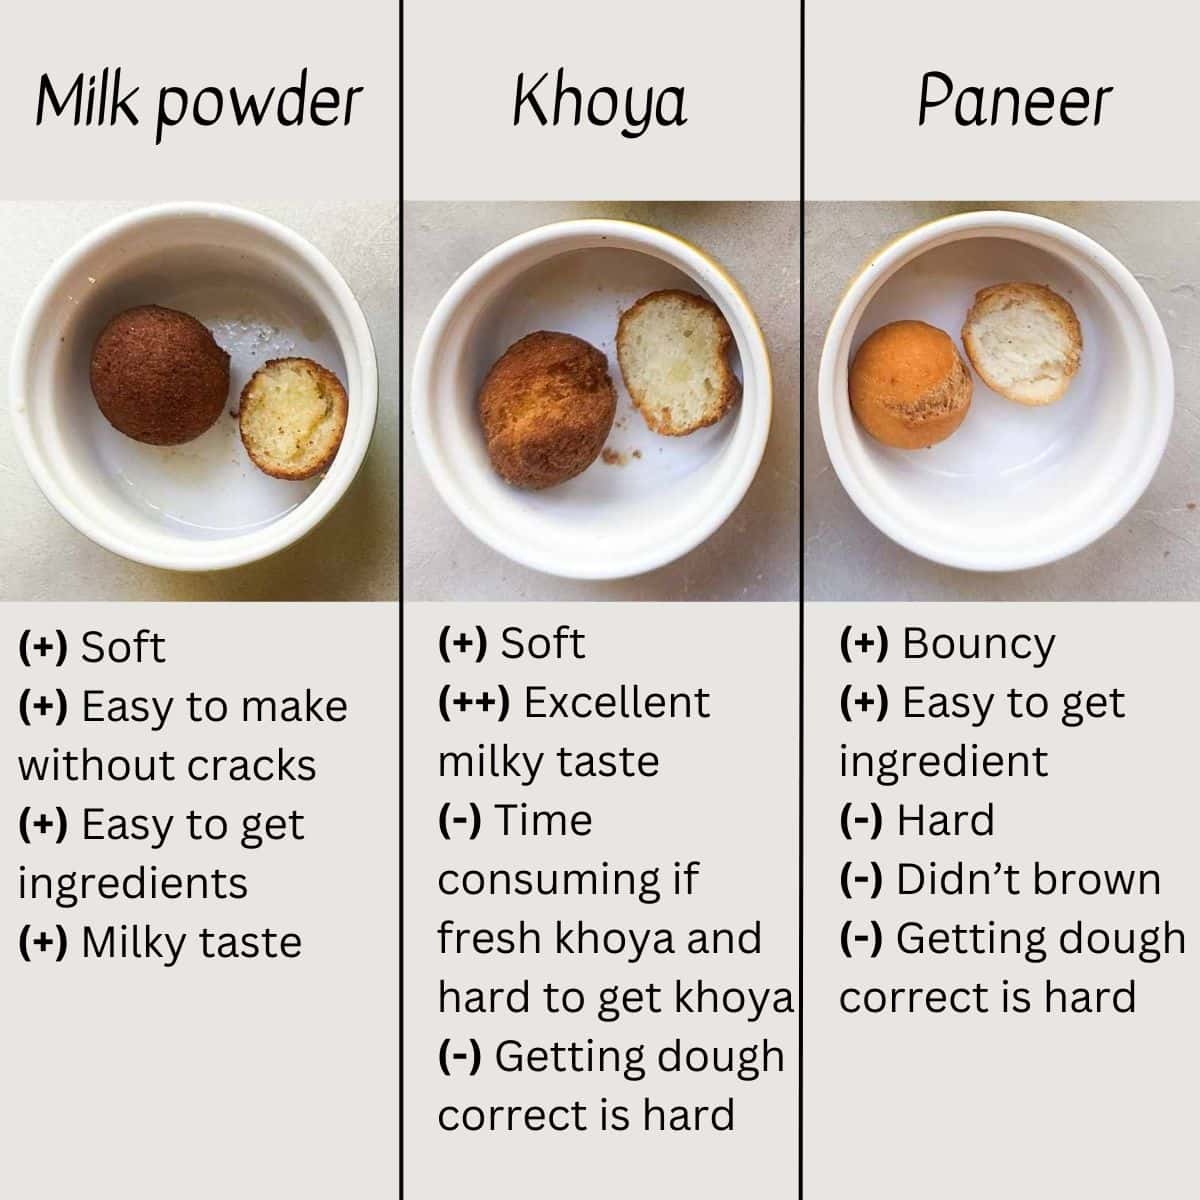 Infographic with 3 columns. Left column has a photo of gulab jamun made with milk powder. The column says milk powder gulab jamuns are soft, easy to make without cracks, easy to get ingredients, and has a milky taste. The center column has a picture of a gulab jamun made with khoya. The column says that the pros of khoya jamuns are that they soft and have an excellent milky taste. The cons are they are time consuming if making fresh khoya, hard to source khoya, and getting the dough right is hard. Right column shows a gulab jamun made with paneer. The pros are that paneer is bouncy and easy to source. However, using this ingredient made the jamuns hard, they didn't brown, and getting the dough correct is hard.